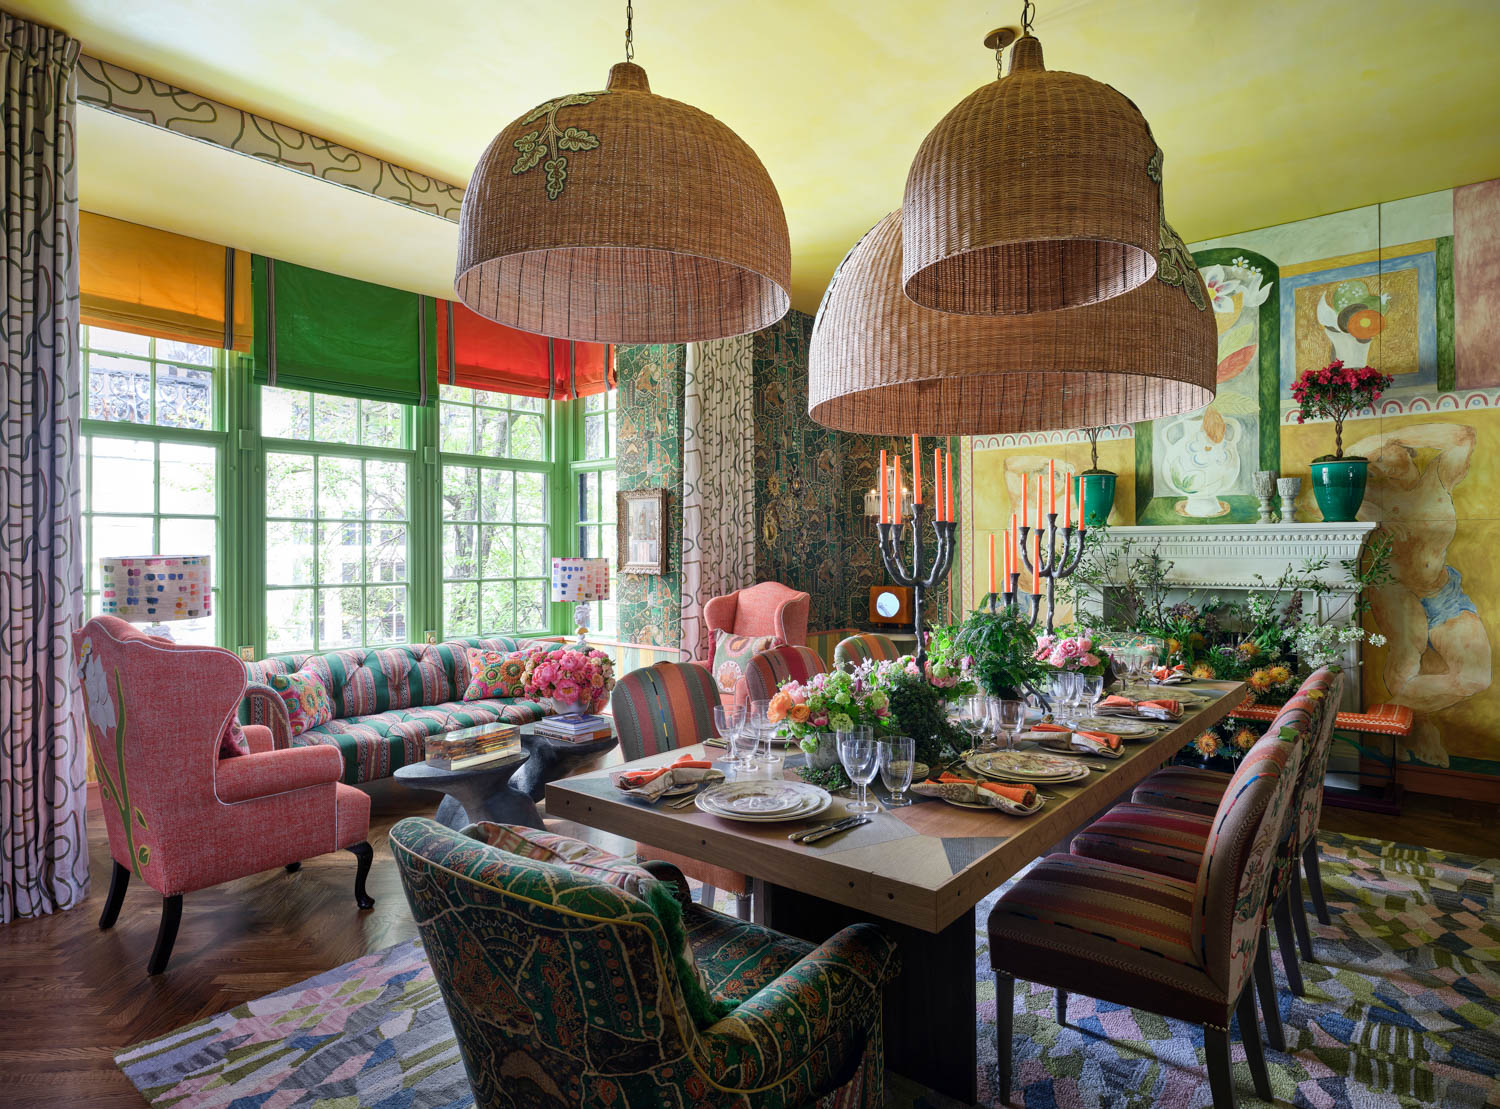 woven shades hang over the dining table in this colorful room